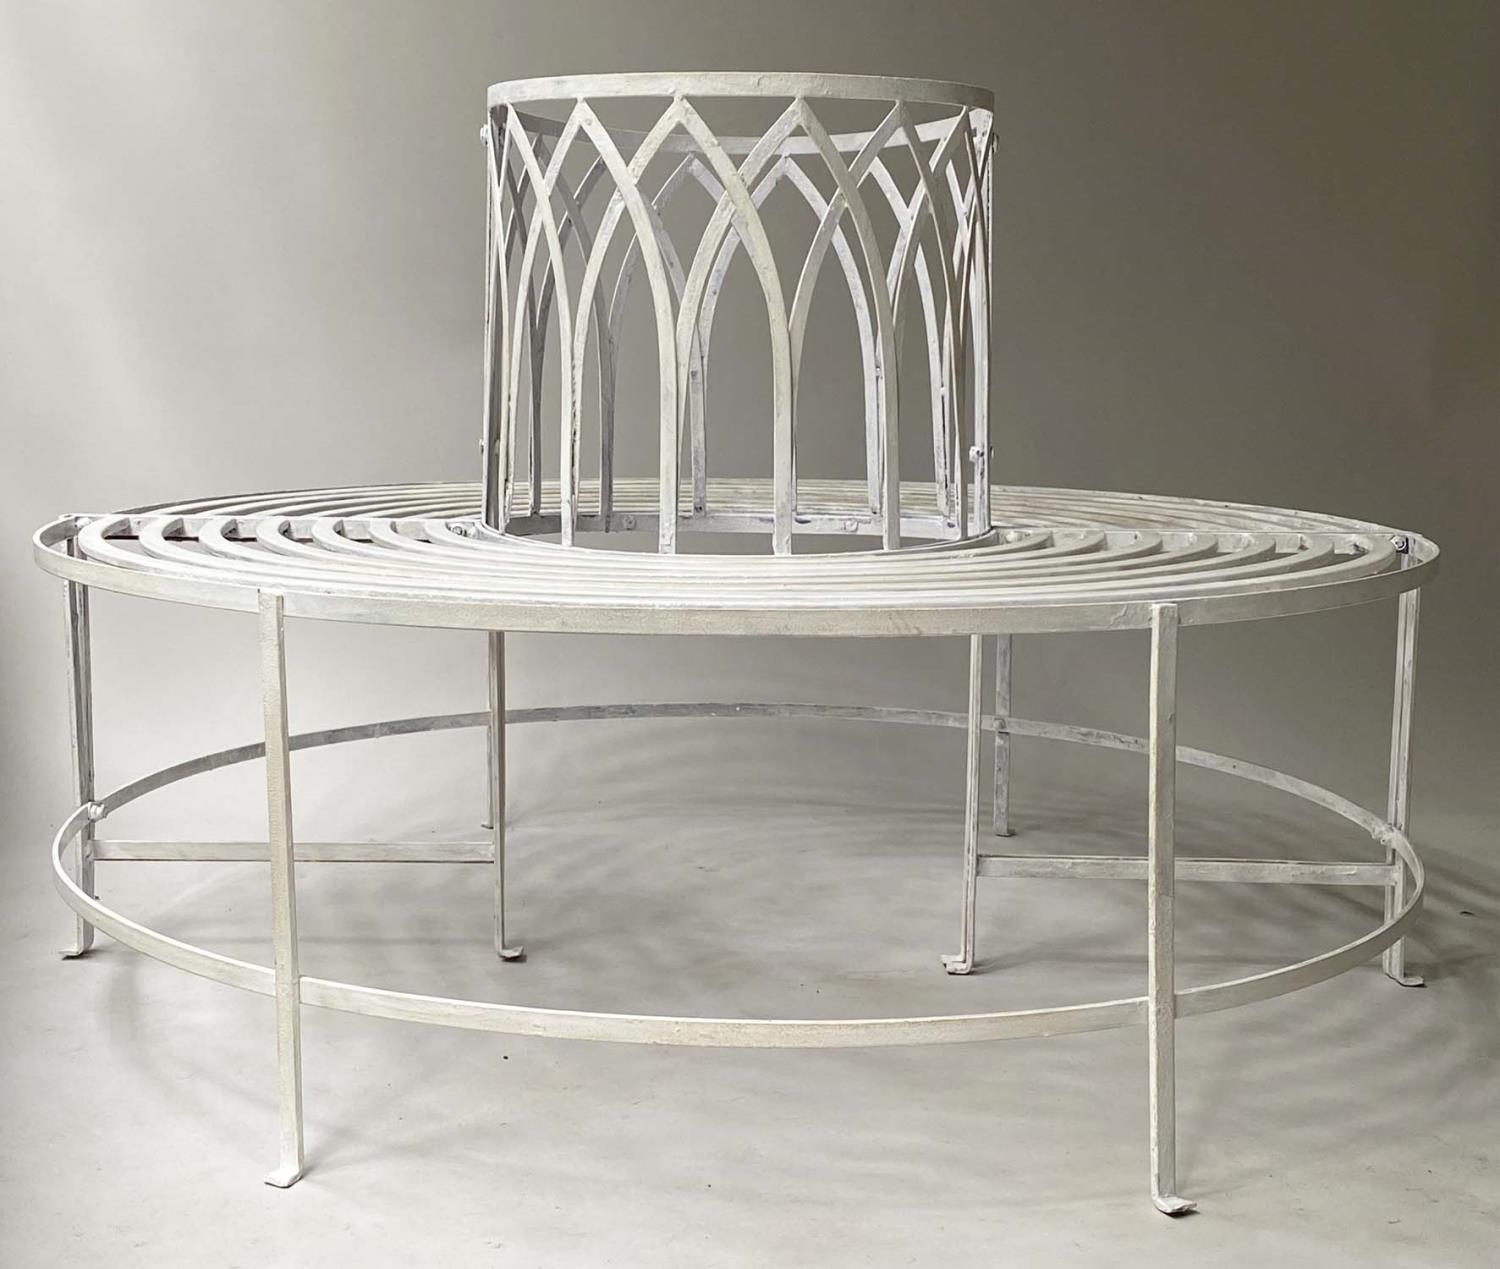 GARDEN TREE BENCH, white painted metal slatted full circle with Gothic arched upstand, 132cm W, - Image 5 of 6